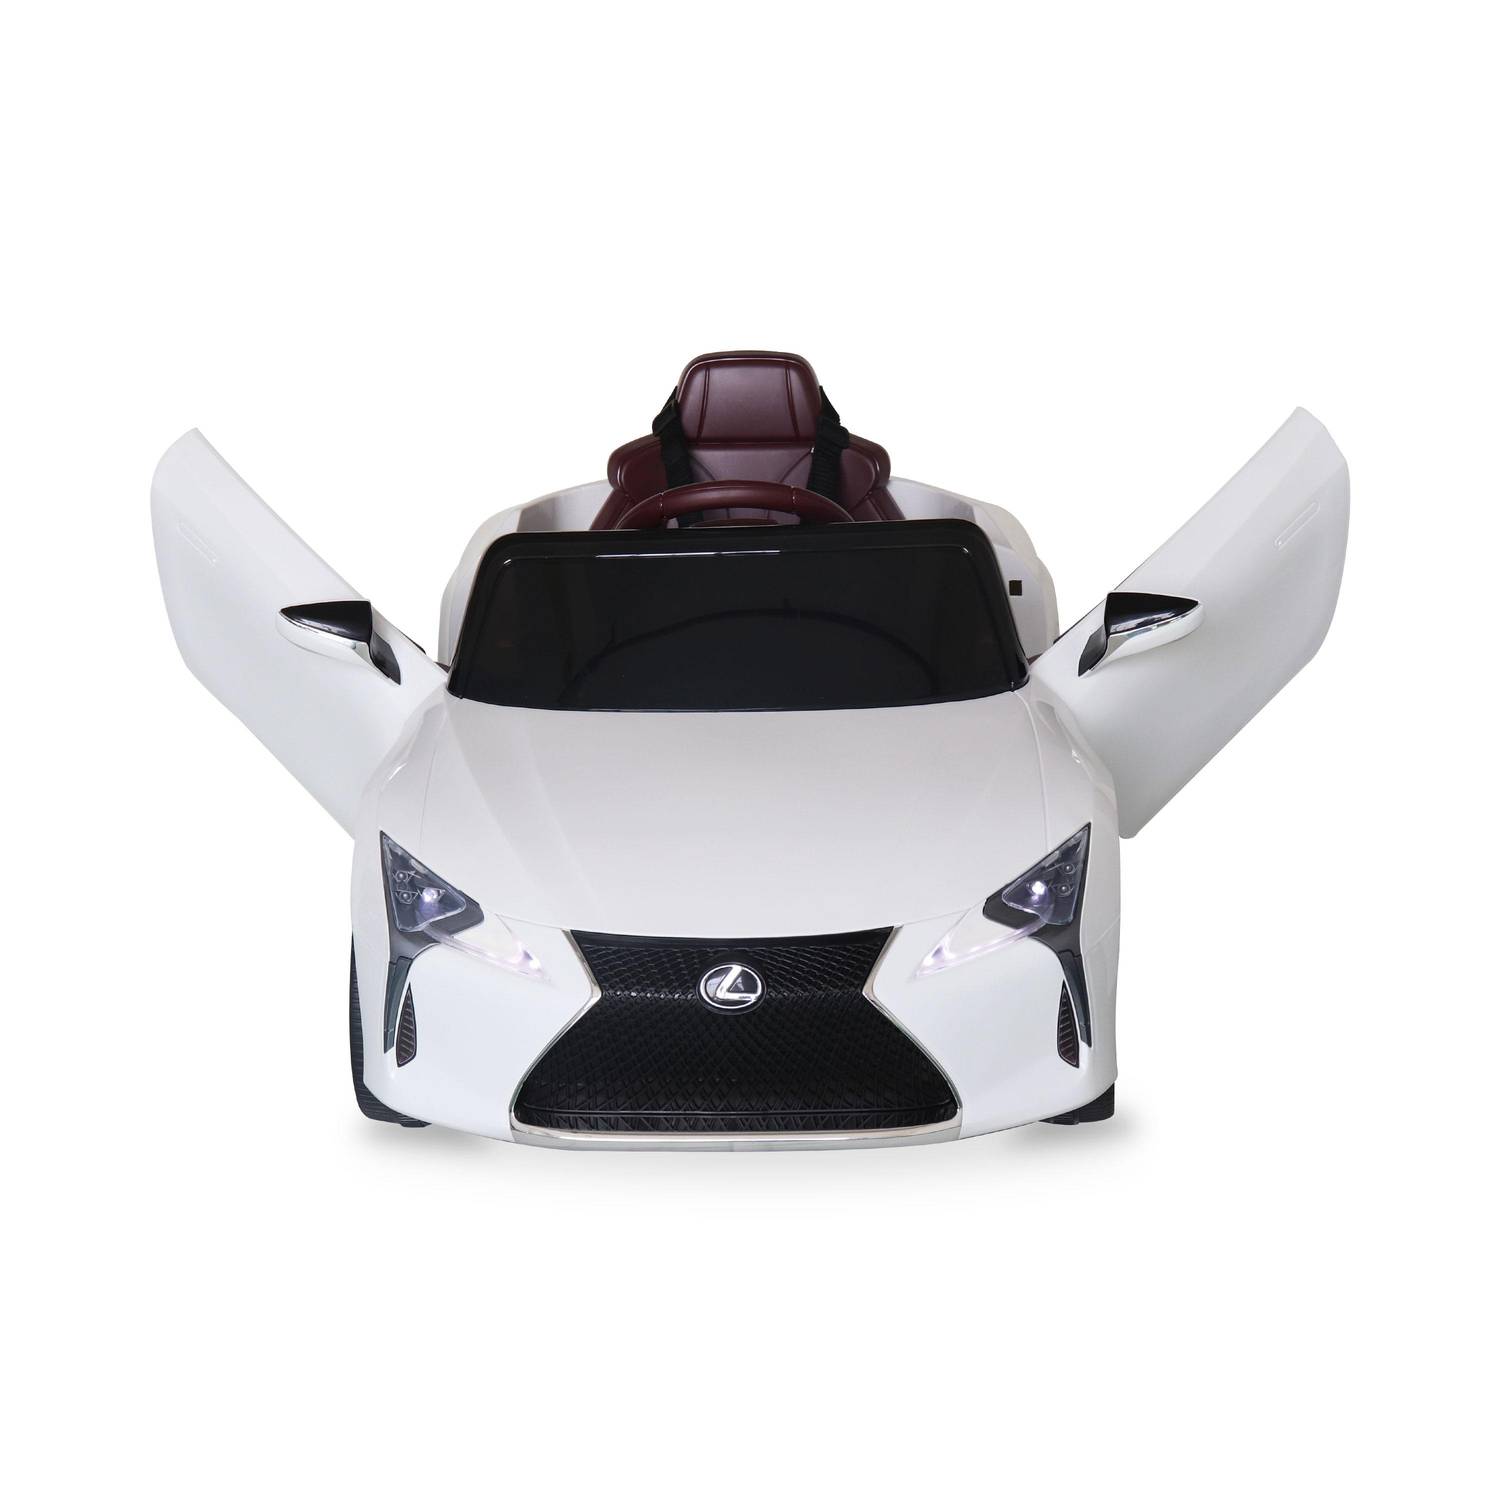 Children's electric car 12V, 1 seat, 4x4 with car radio and remote control - Lexus LC500 - White Photo3